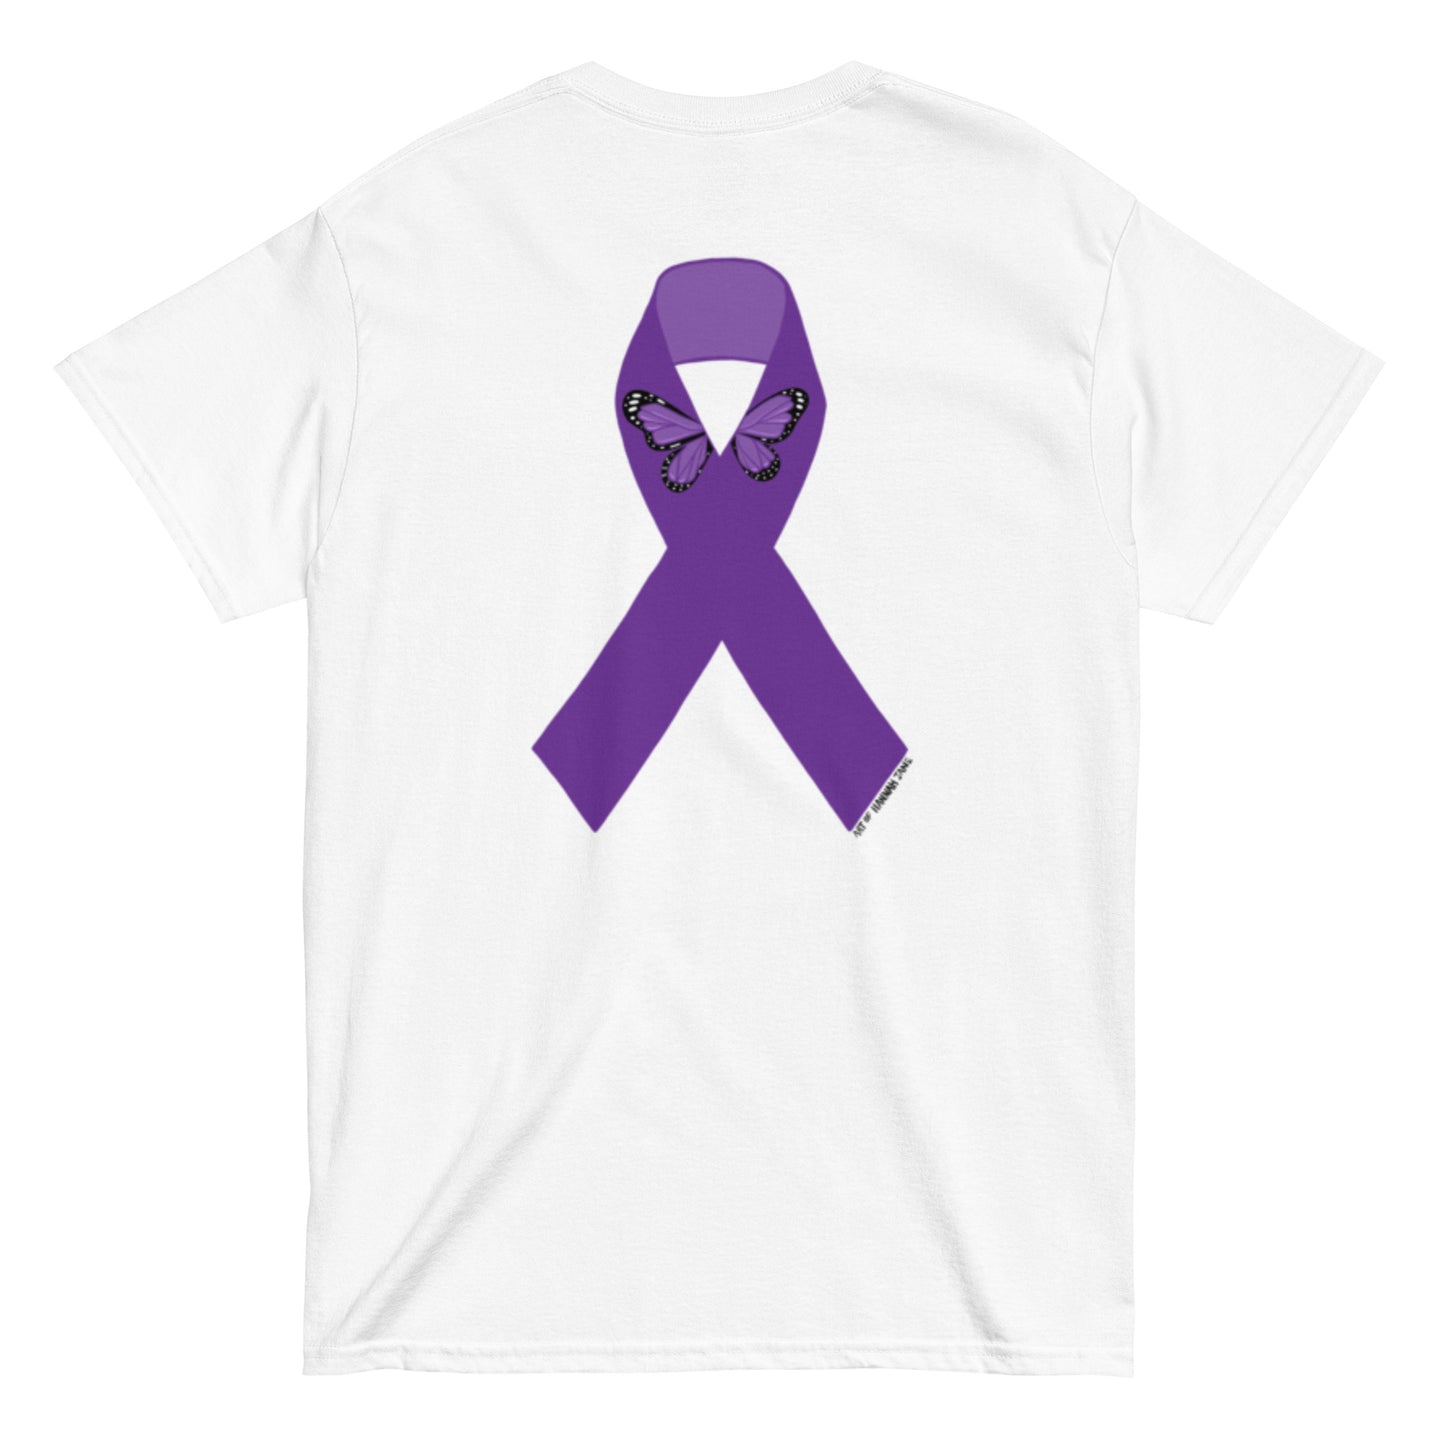 Chiari Strong butterfly ribbon unisex classic tee